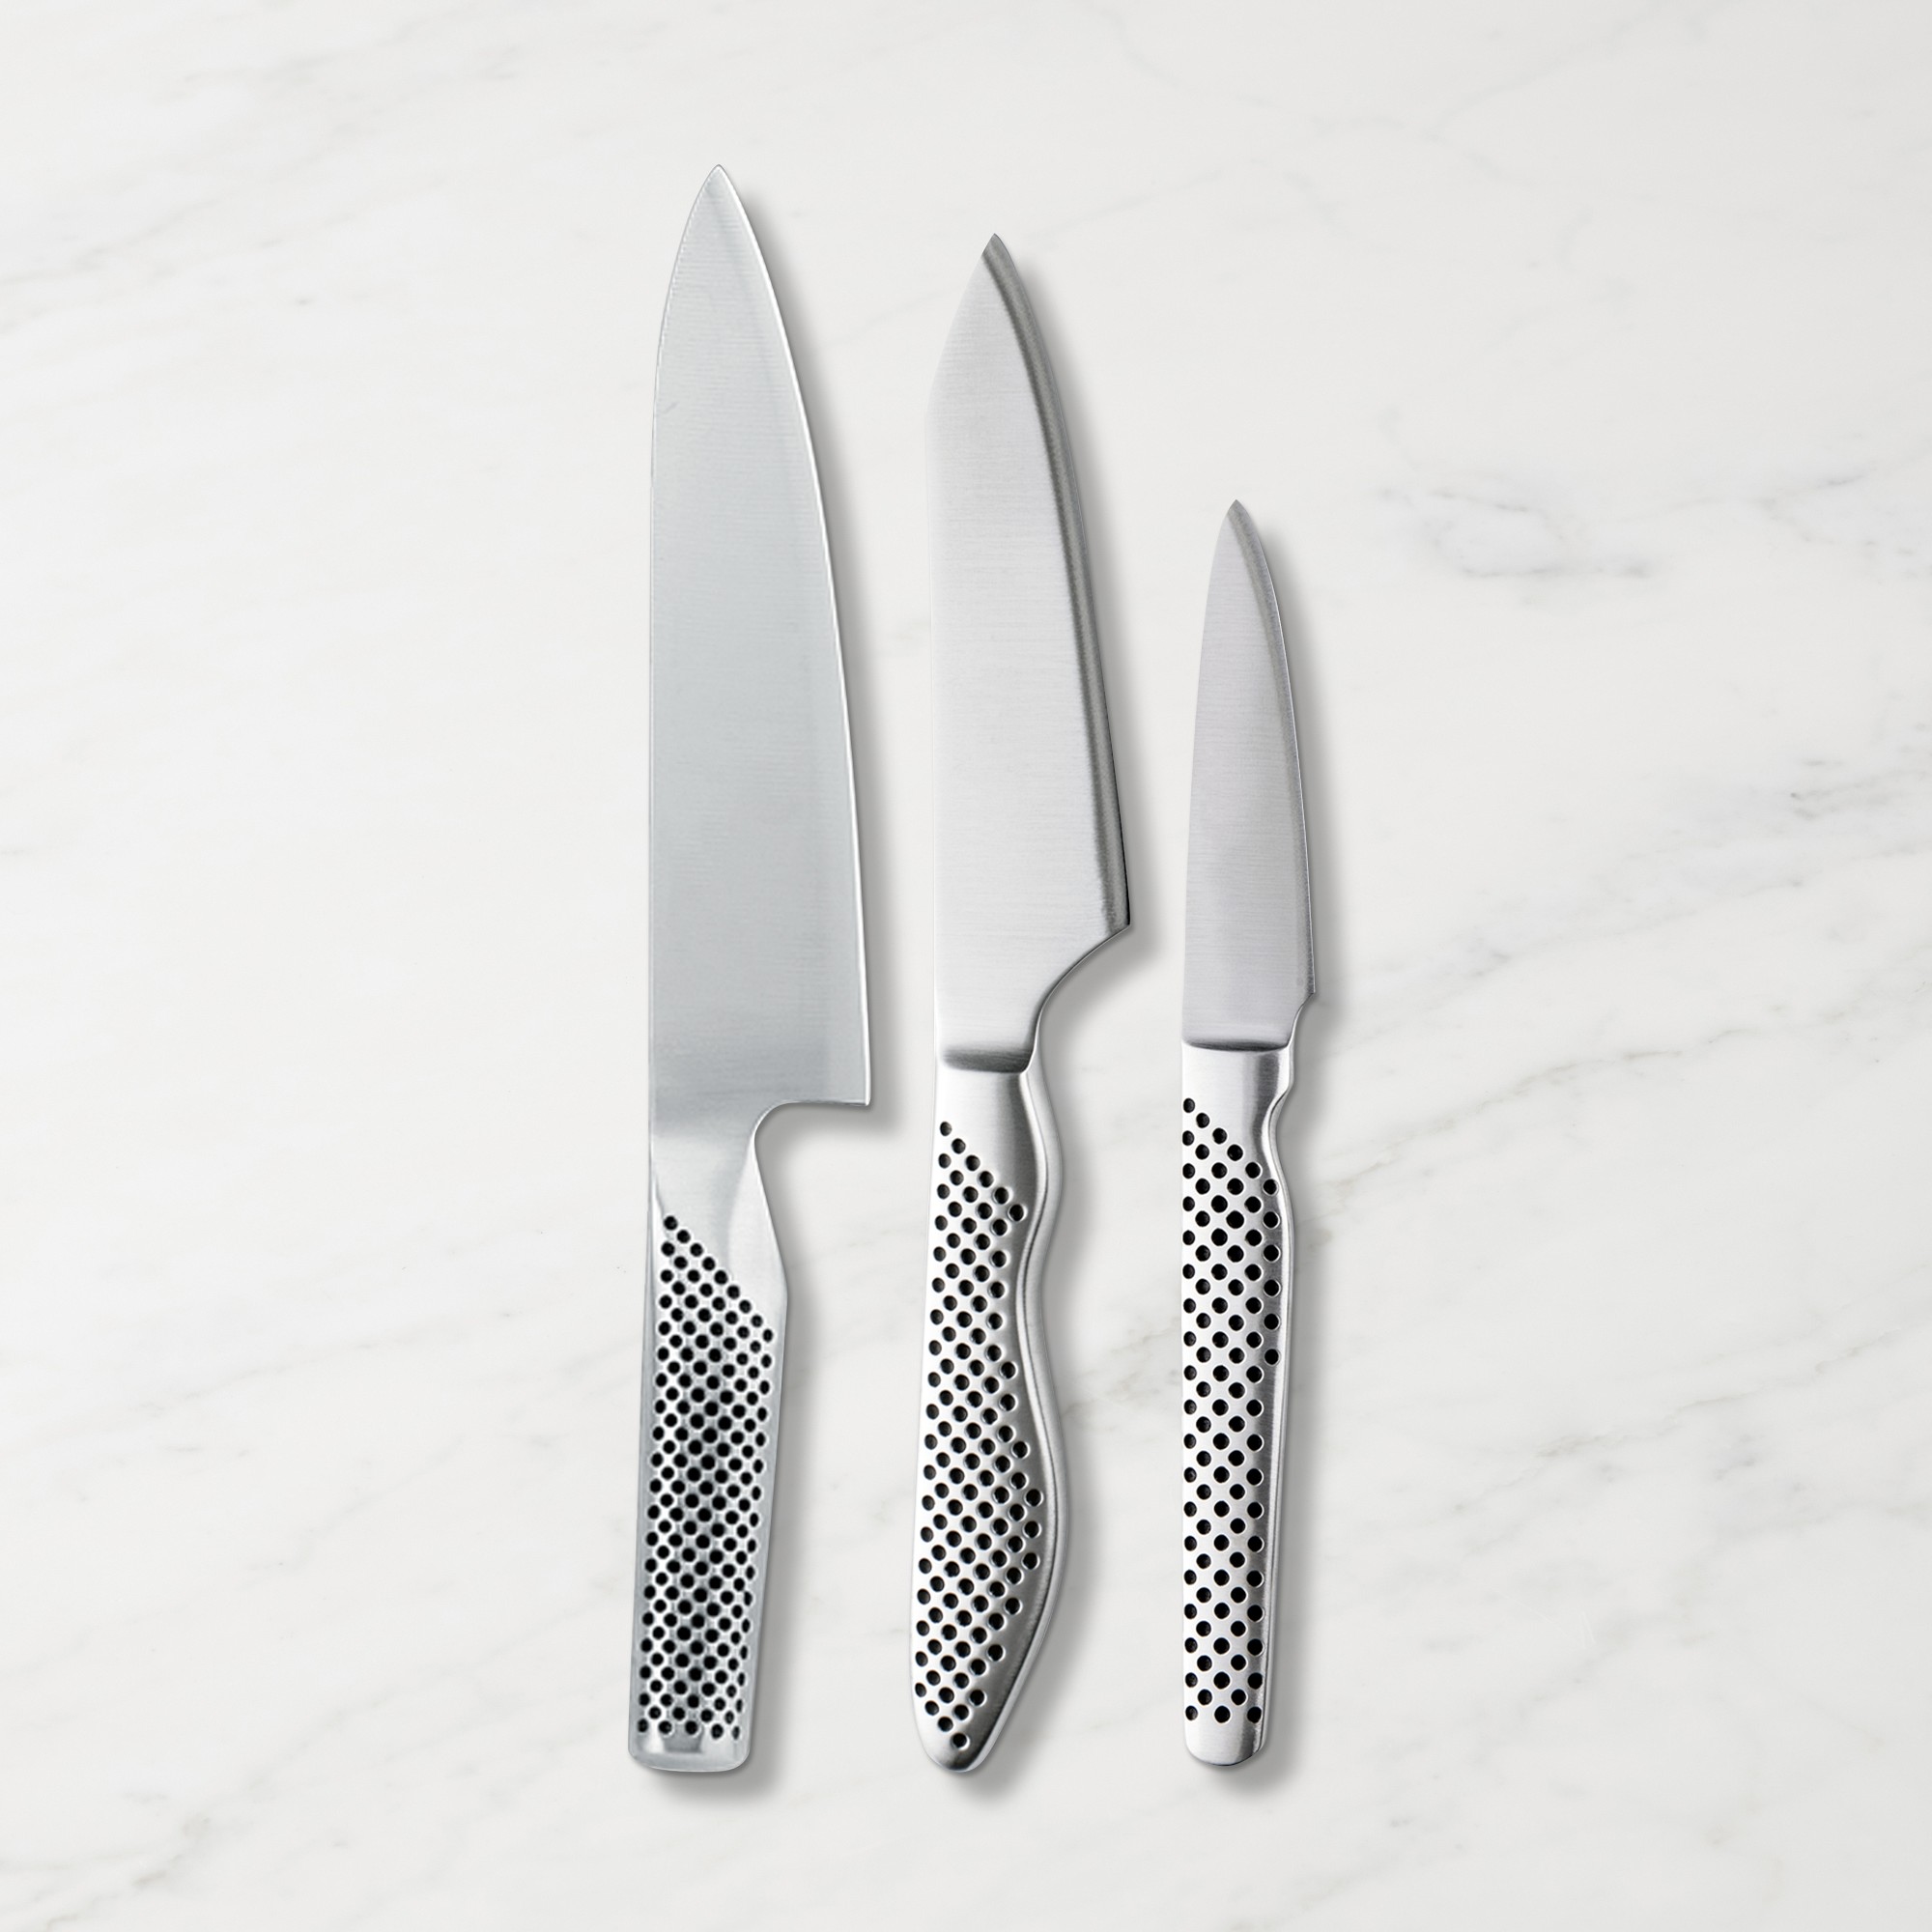 Global Classic Chef, Utility, Paring Knives, Set of 3